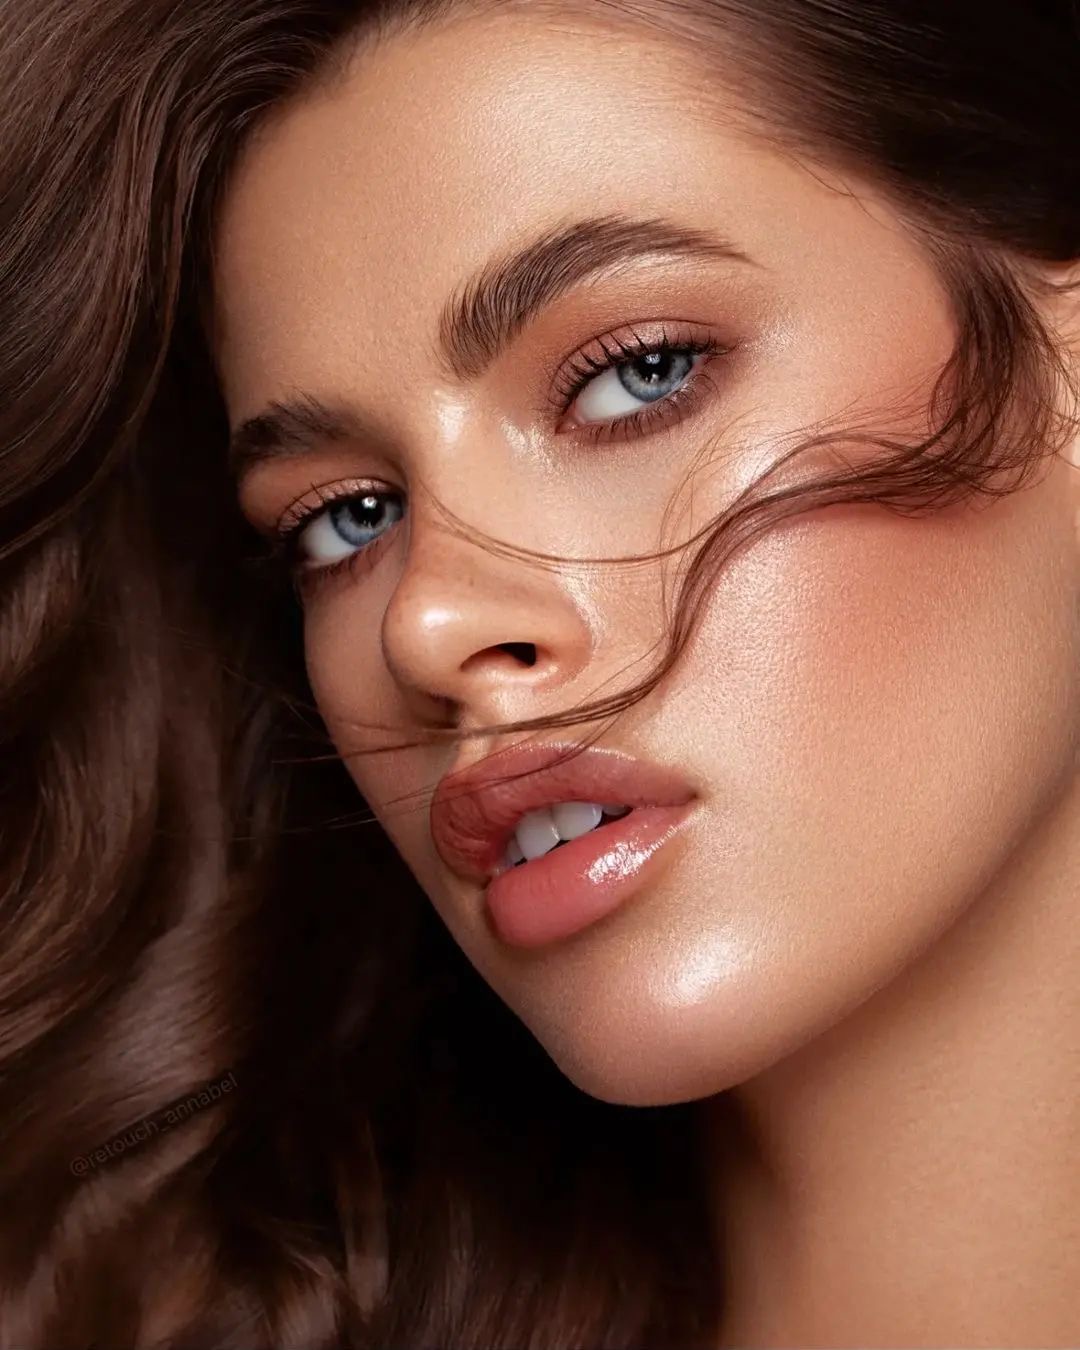 11 Simple Secrets to Maintaining a Youthful Healthy Glow ...